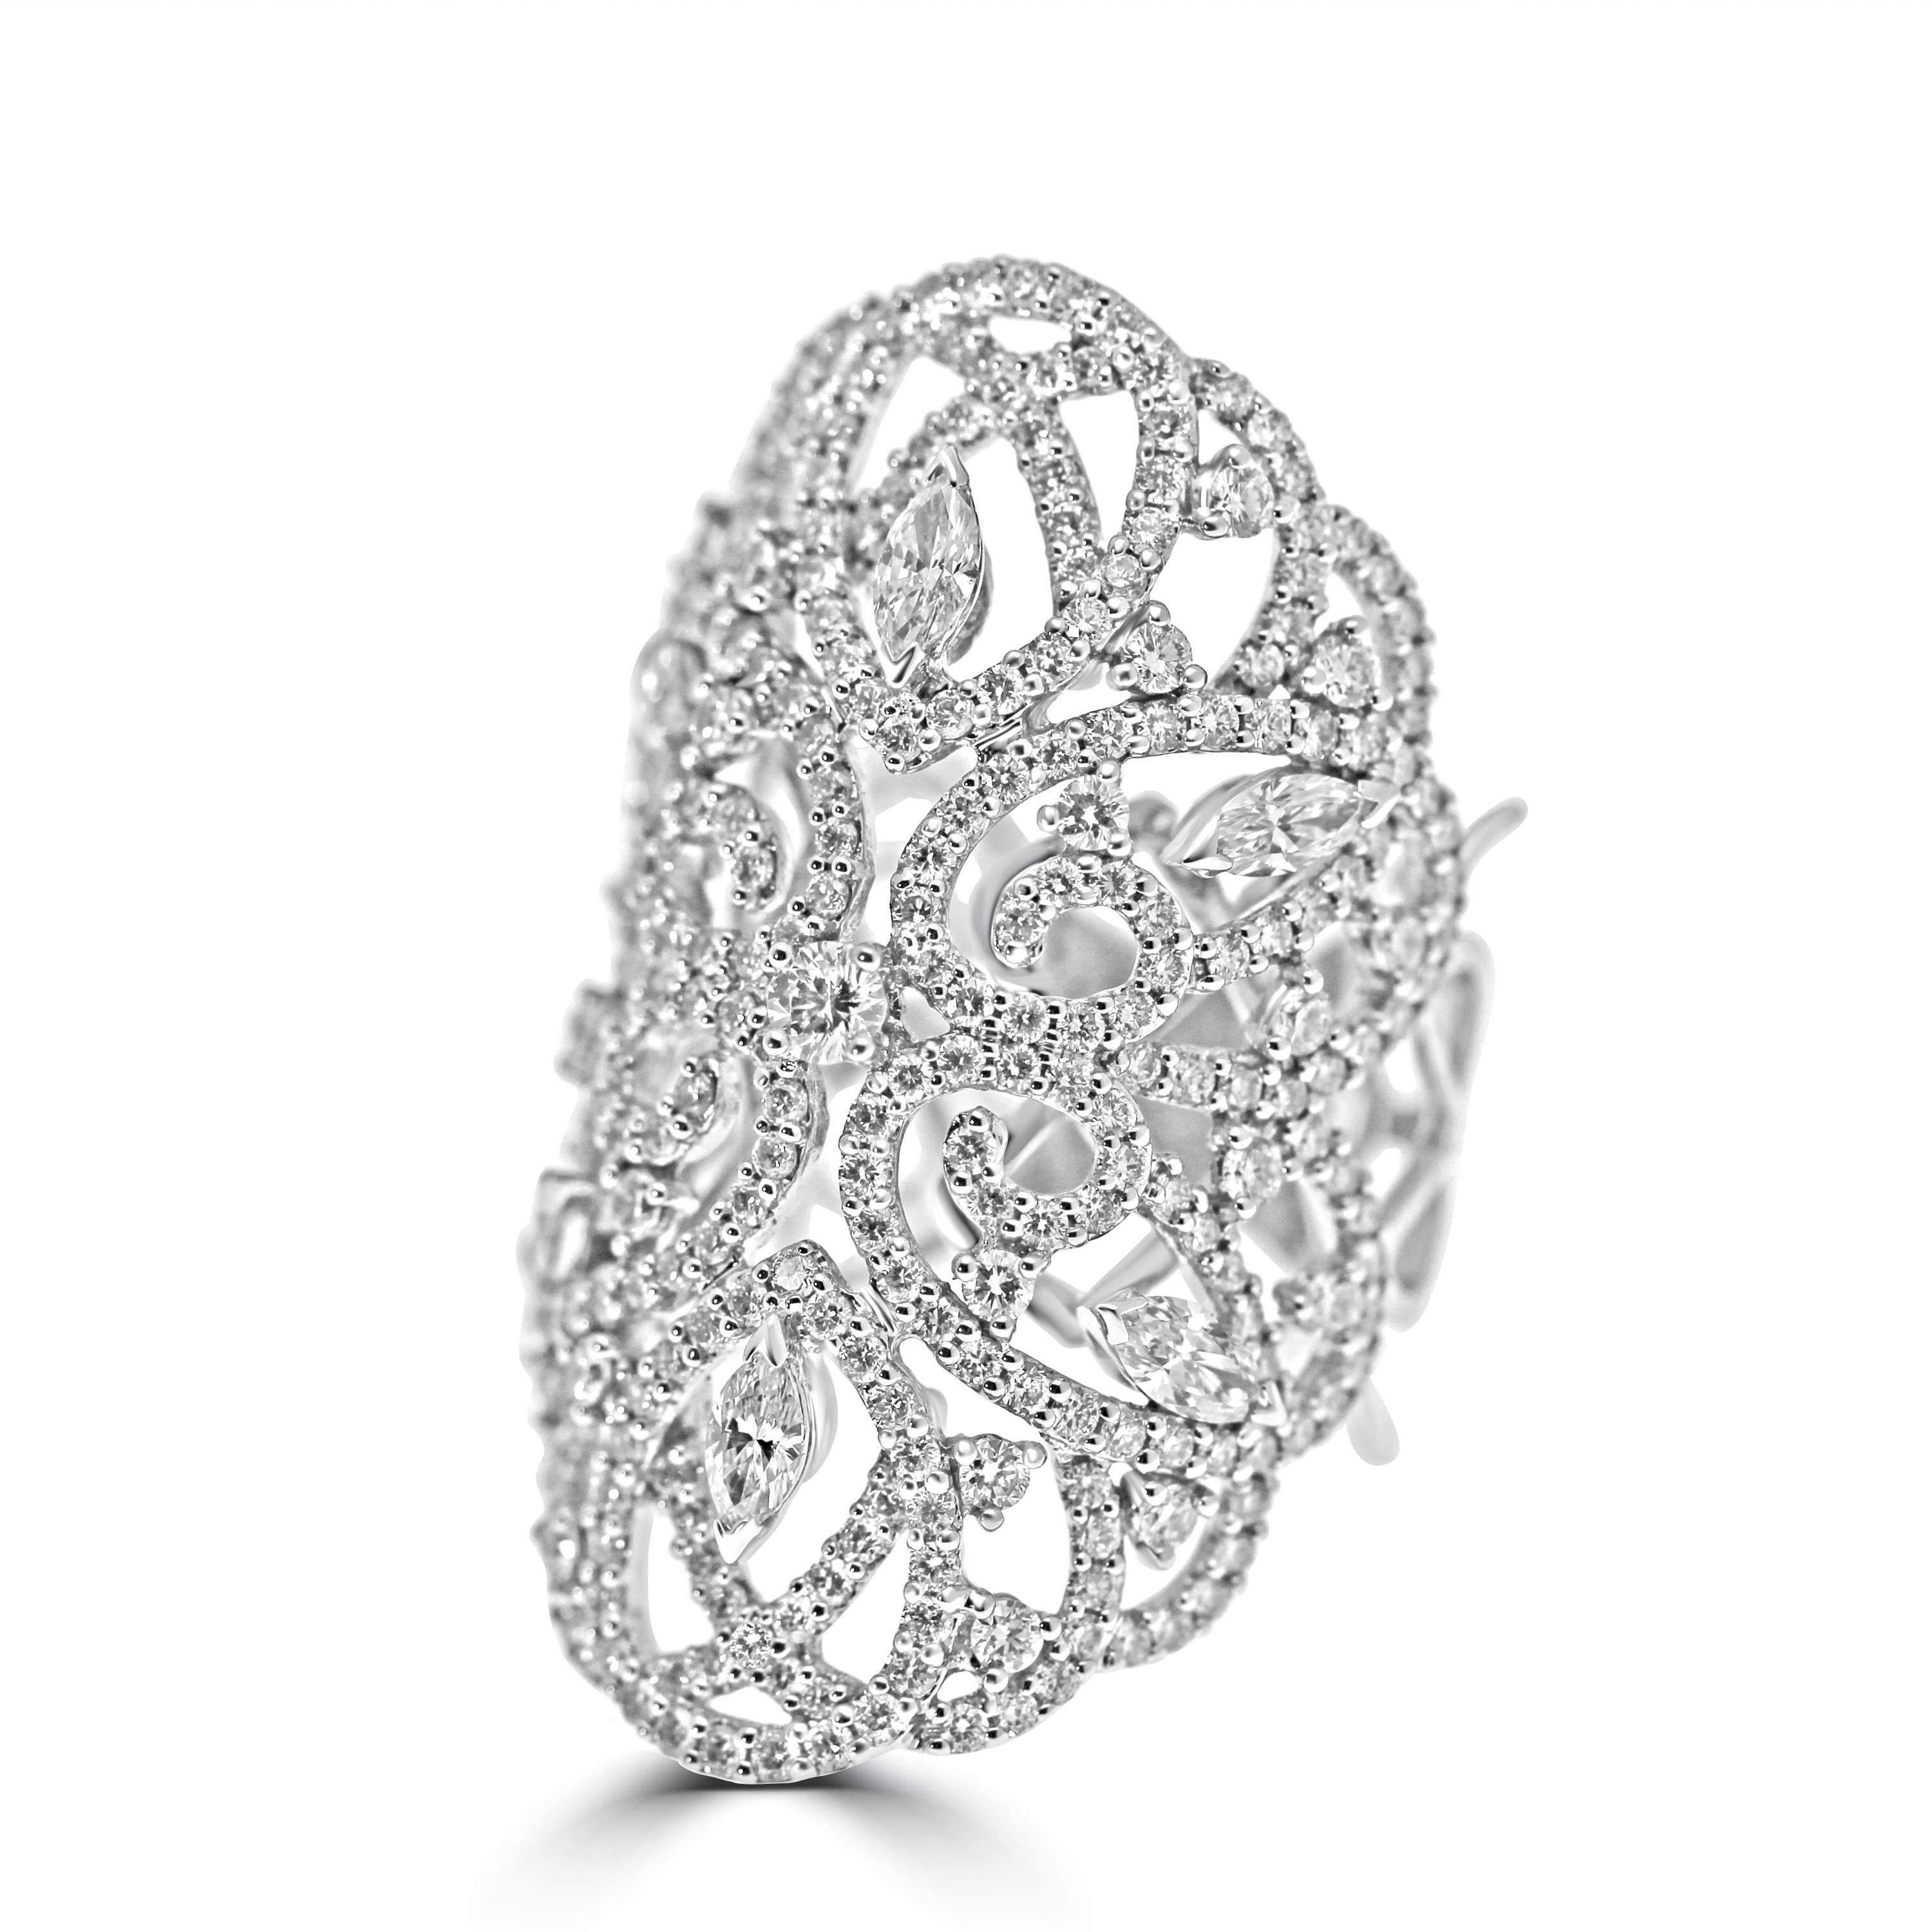 Exquisite 18kt white gold lace ring.
Set with 3.50ct of pure white brilliant and marquise cut diamonds to add an extra fancy touch.
Very comfortable to wear,  as the back is specially crafted to not be thick and heavy.




